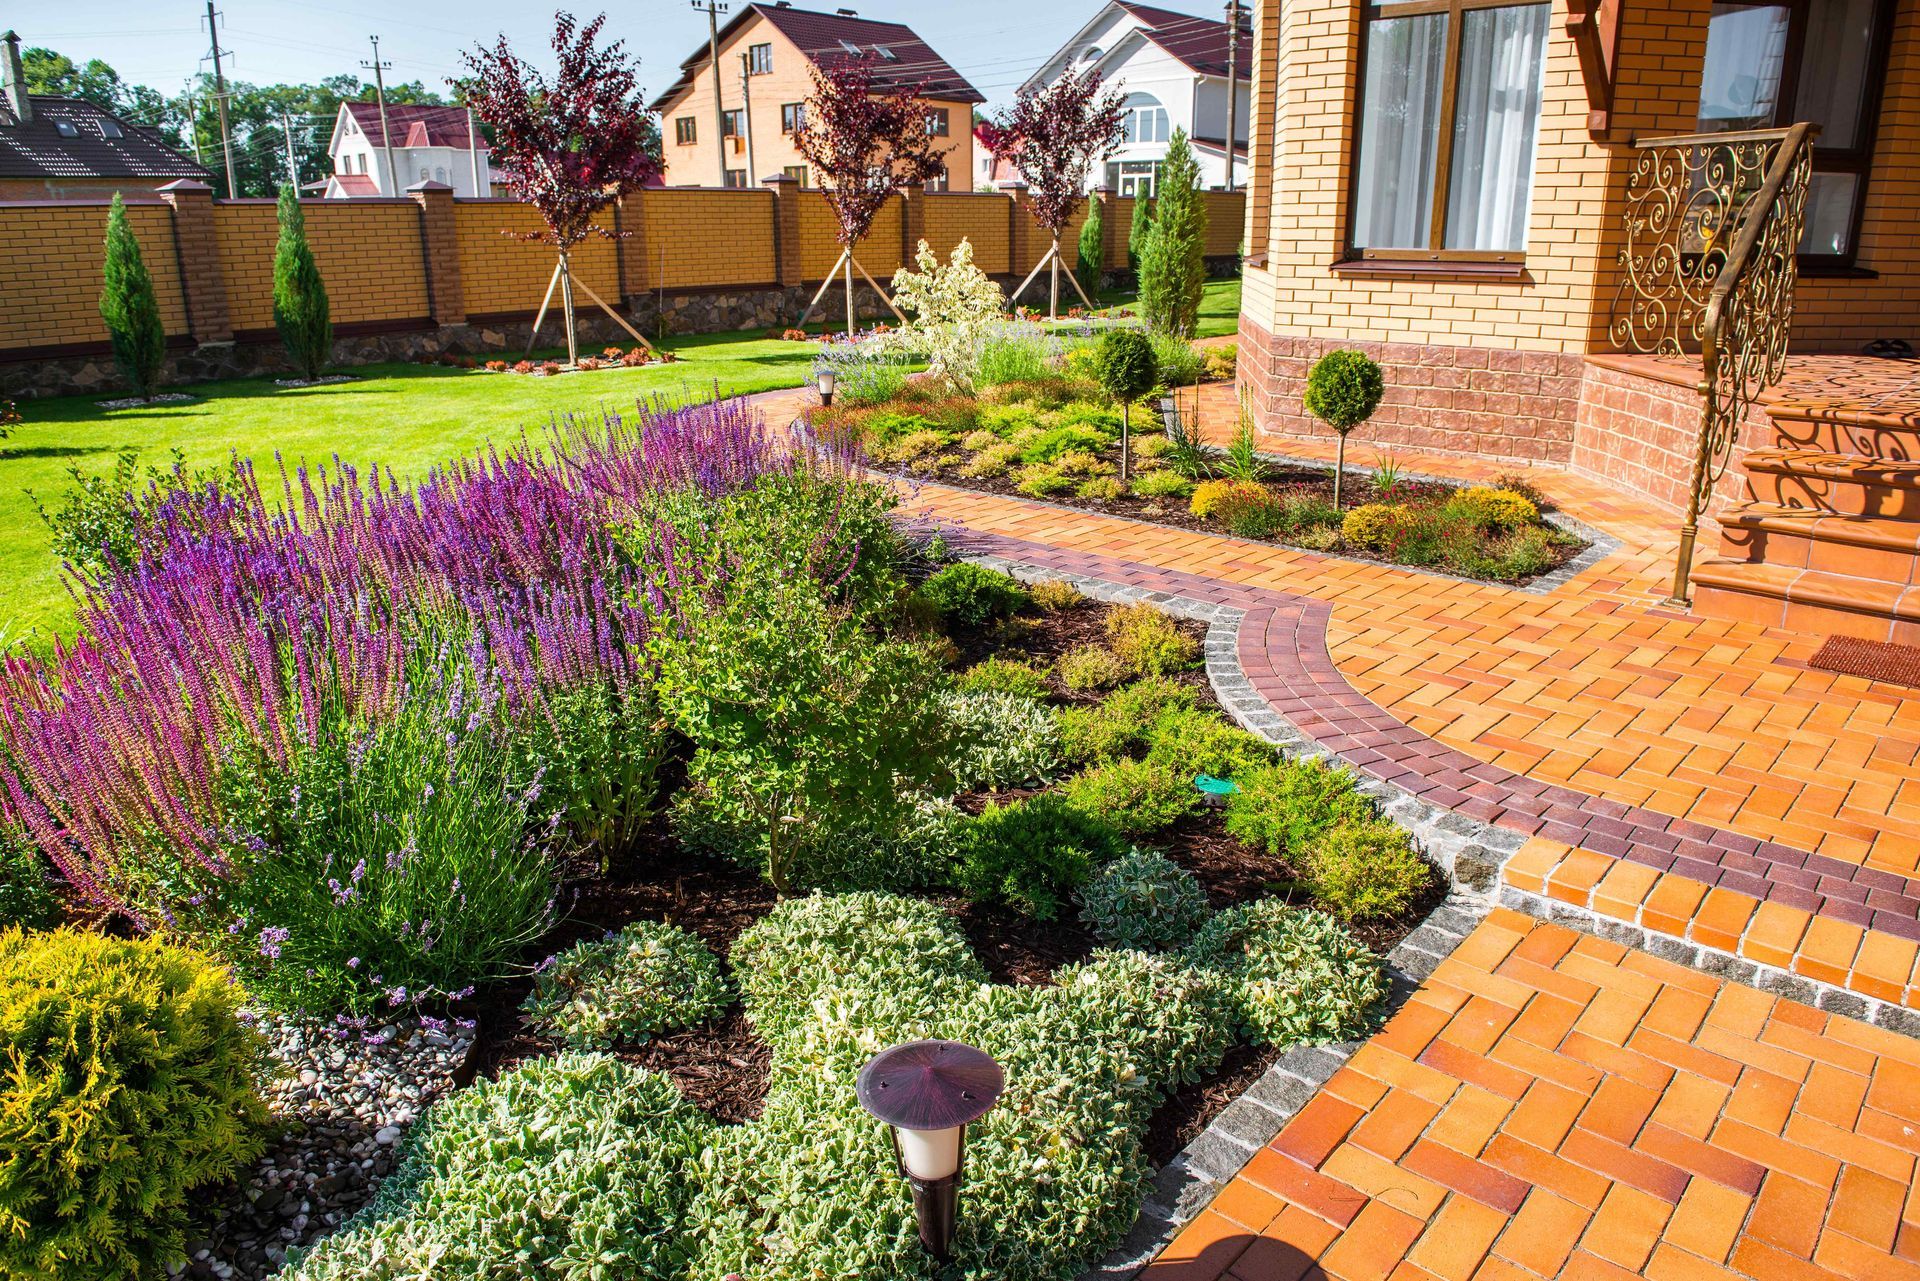 A flower garden by a paver pathway